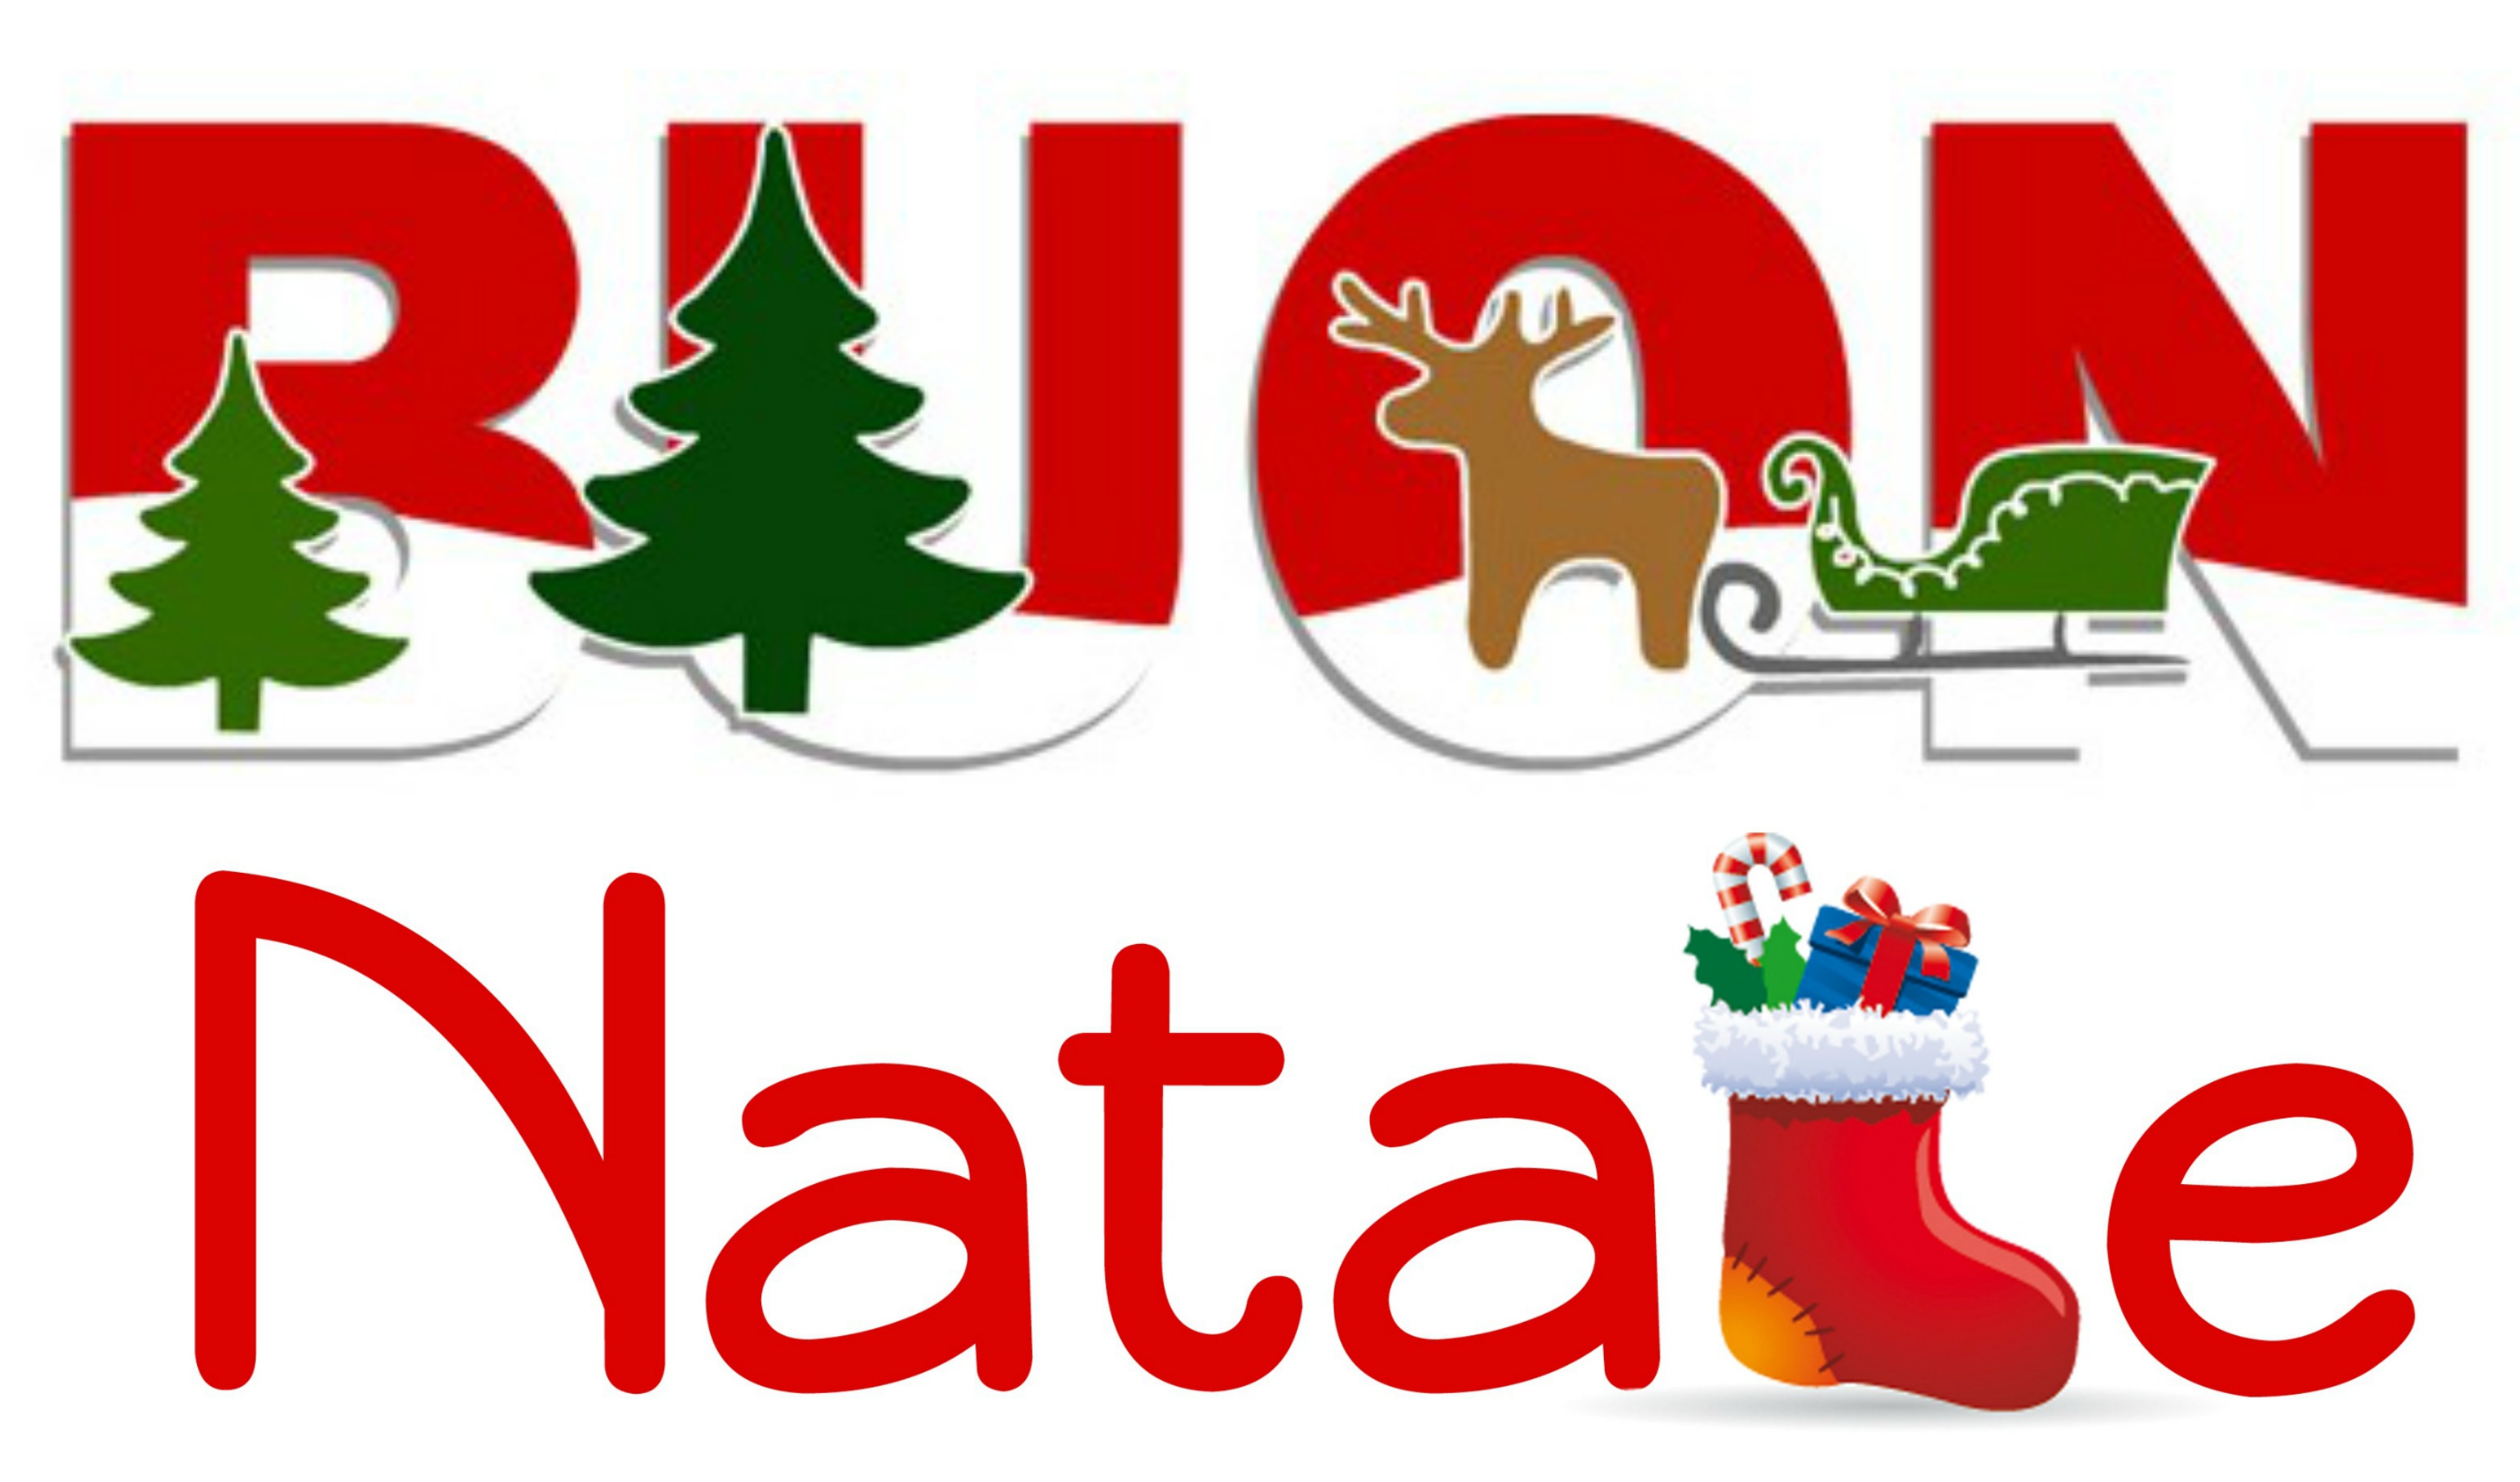 Font Buon Natale.Buon Natale Smile Laugh Travel Love Be Yourself Enjoy Life